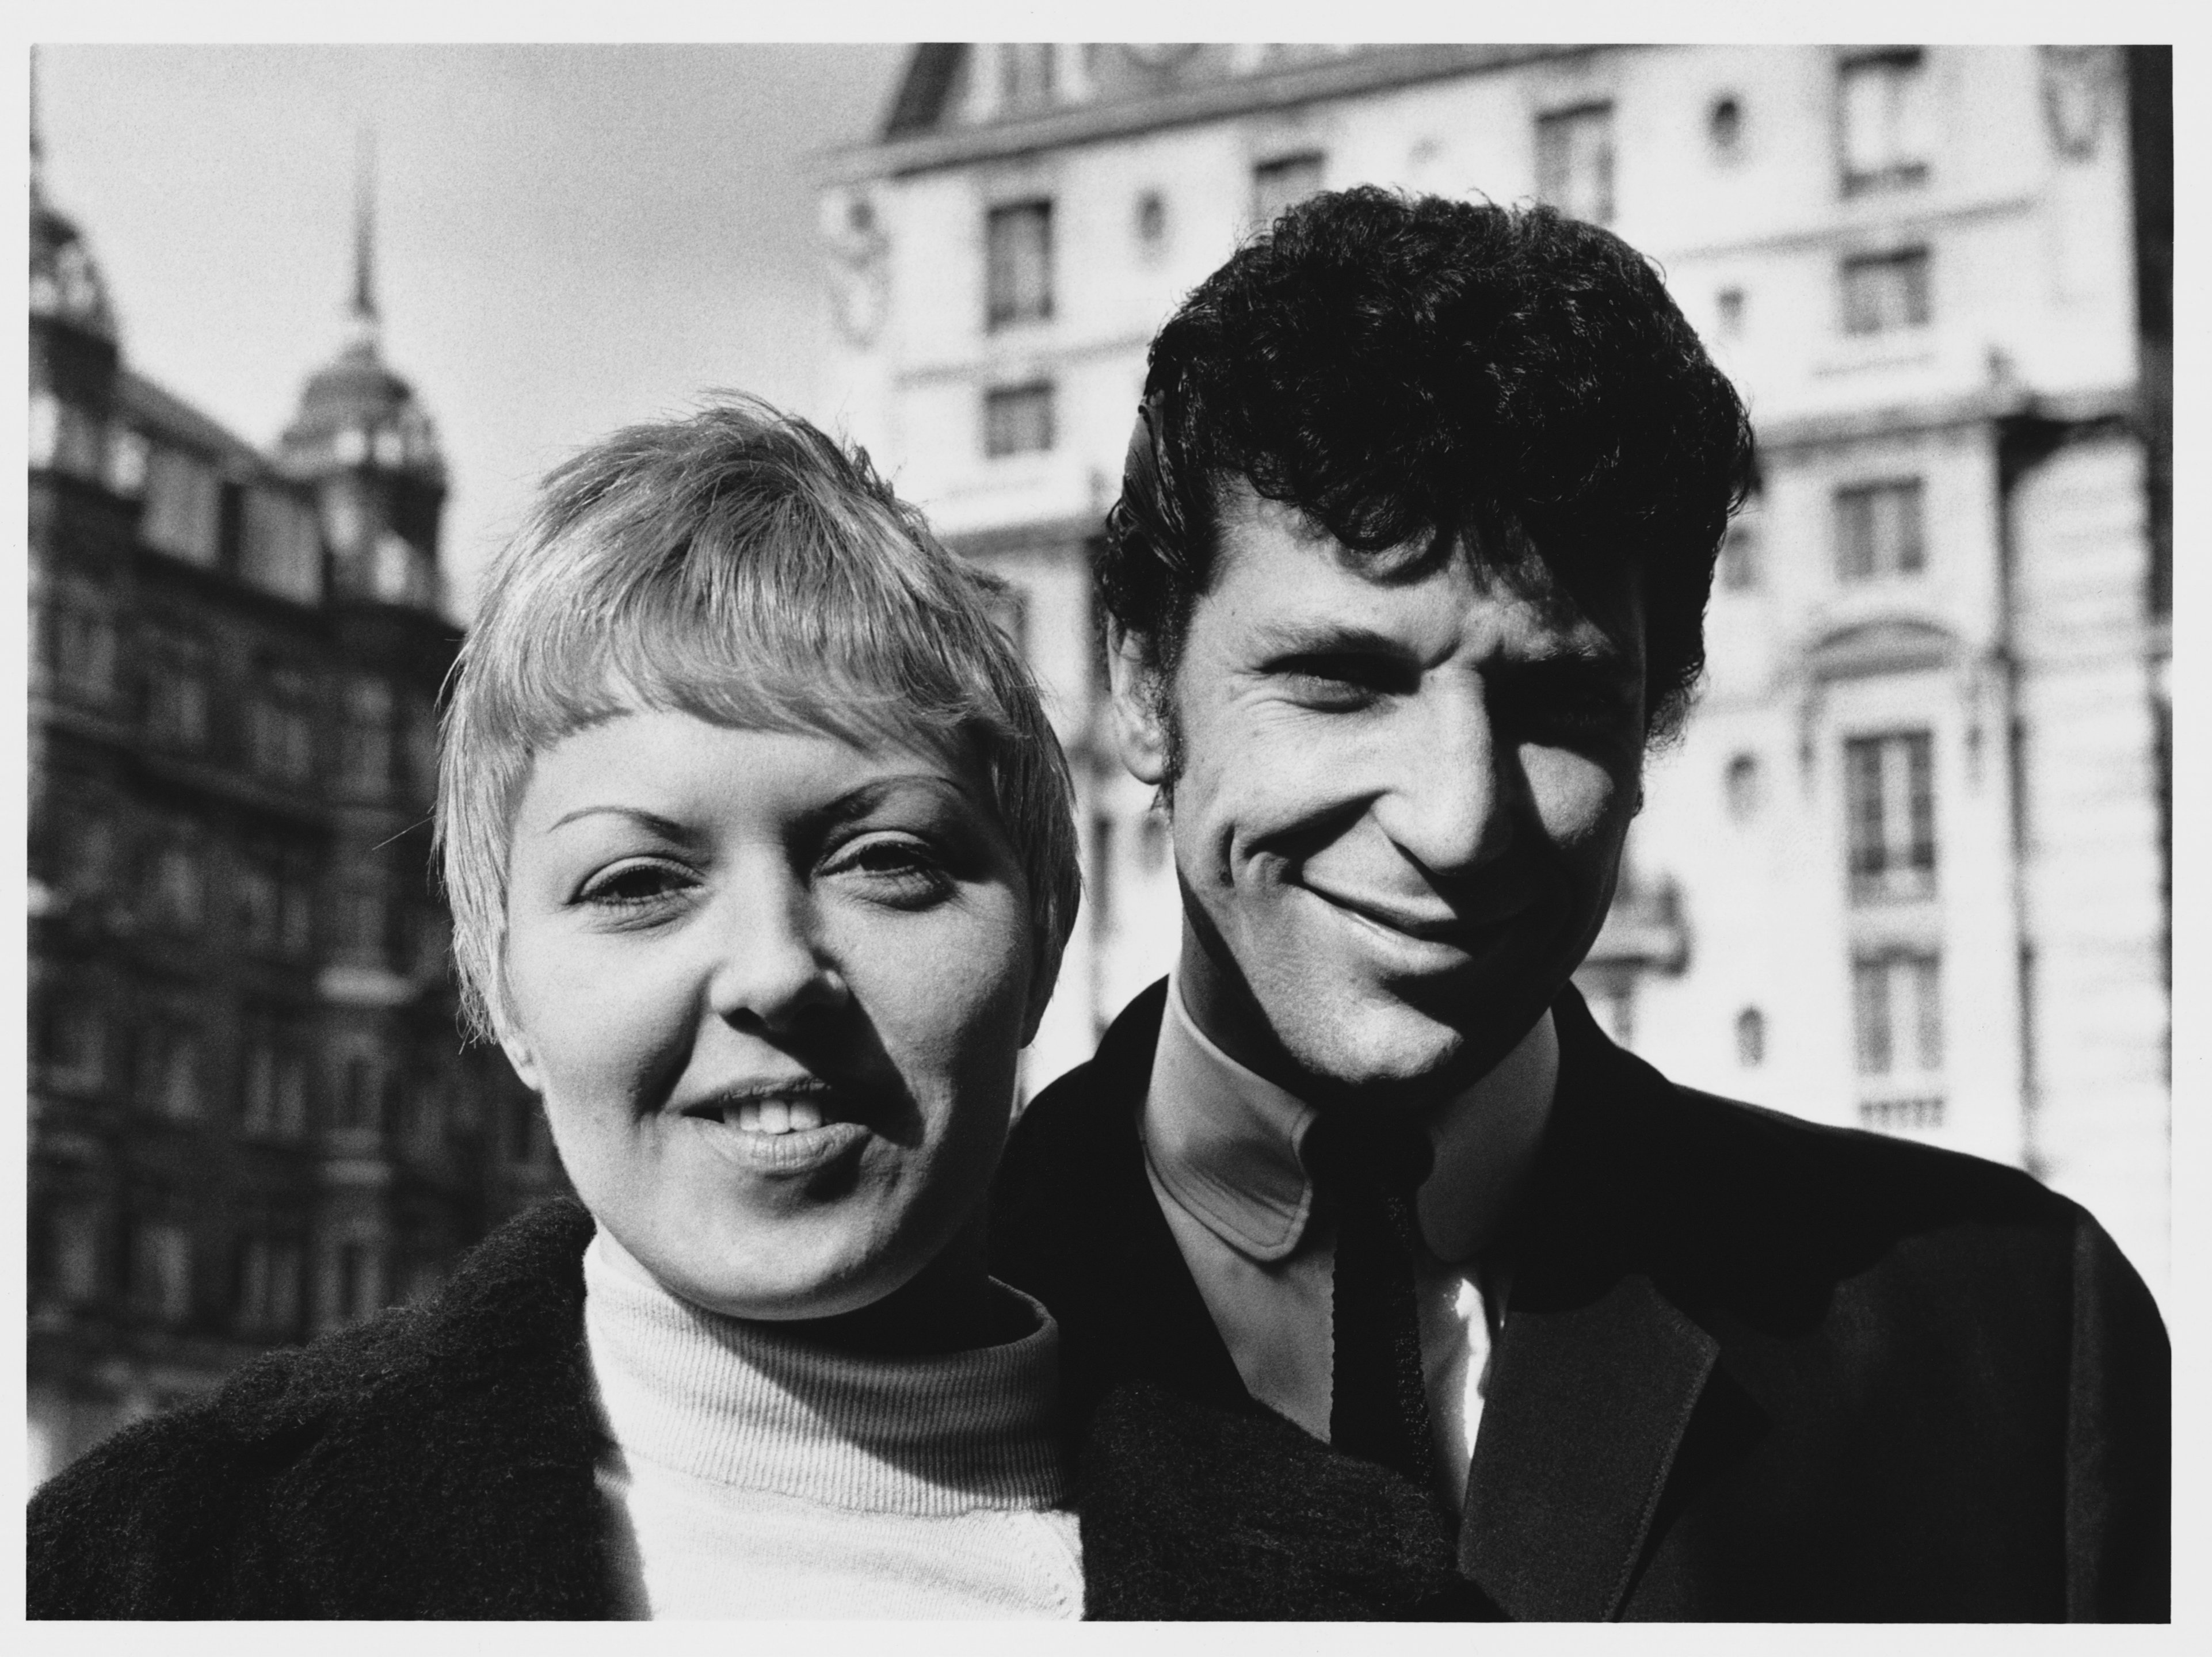 Singer Tom Jones and his wife Melinda on January 1964 | Source: Getty Images